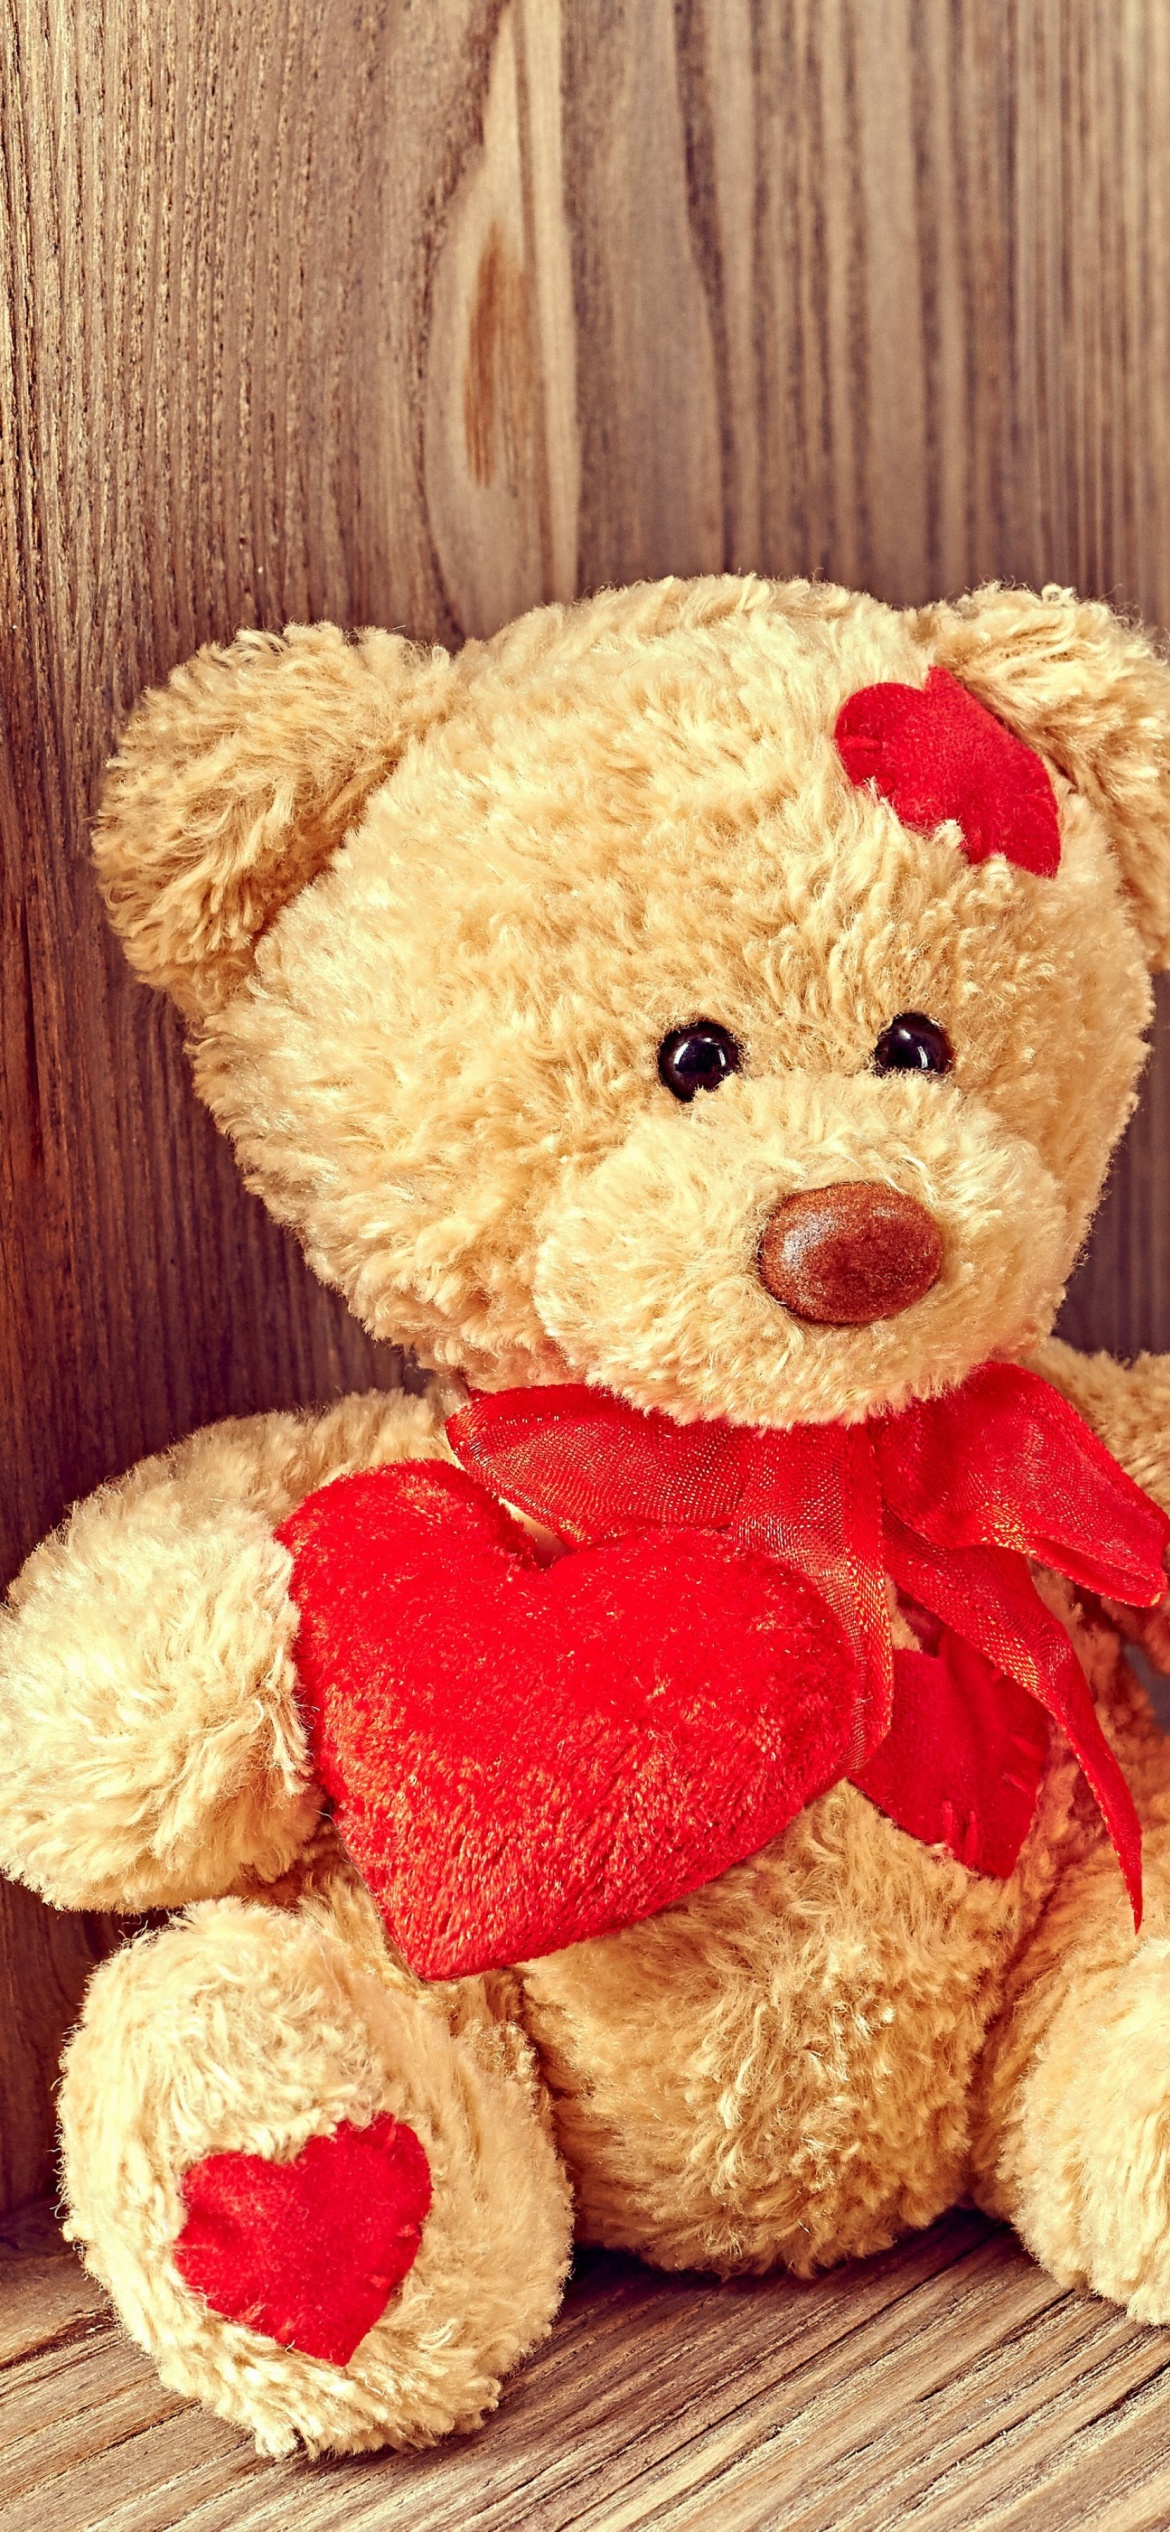 Brodwn Teddy Bear Gift for Saint Valentines Day wallpaper 1170x2532